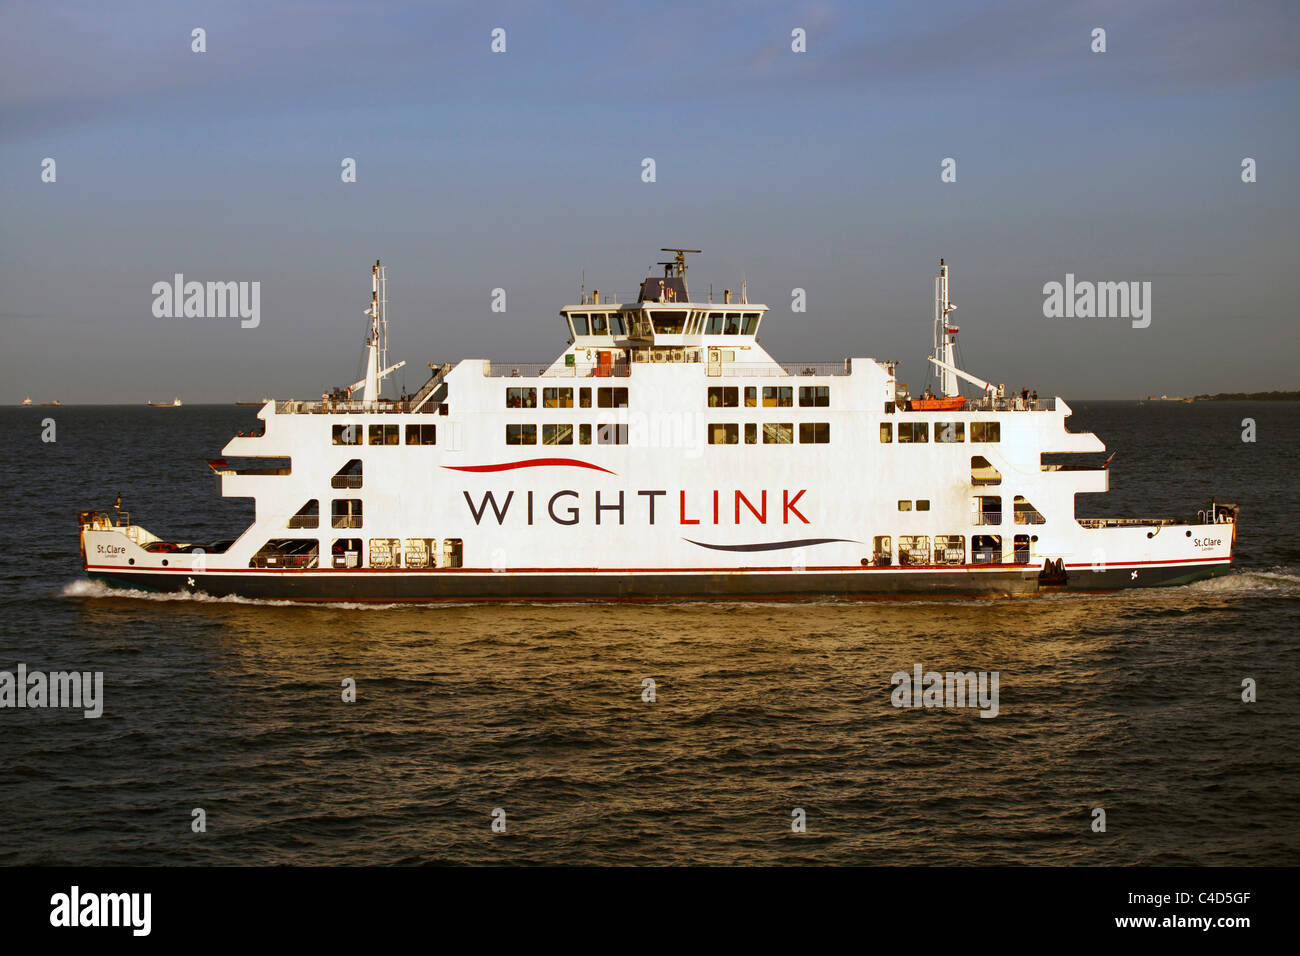 Wightlink cross Solent ferry sailing to the Isle of Wight, England Stock Photo